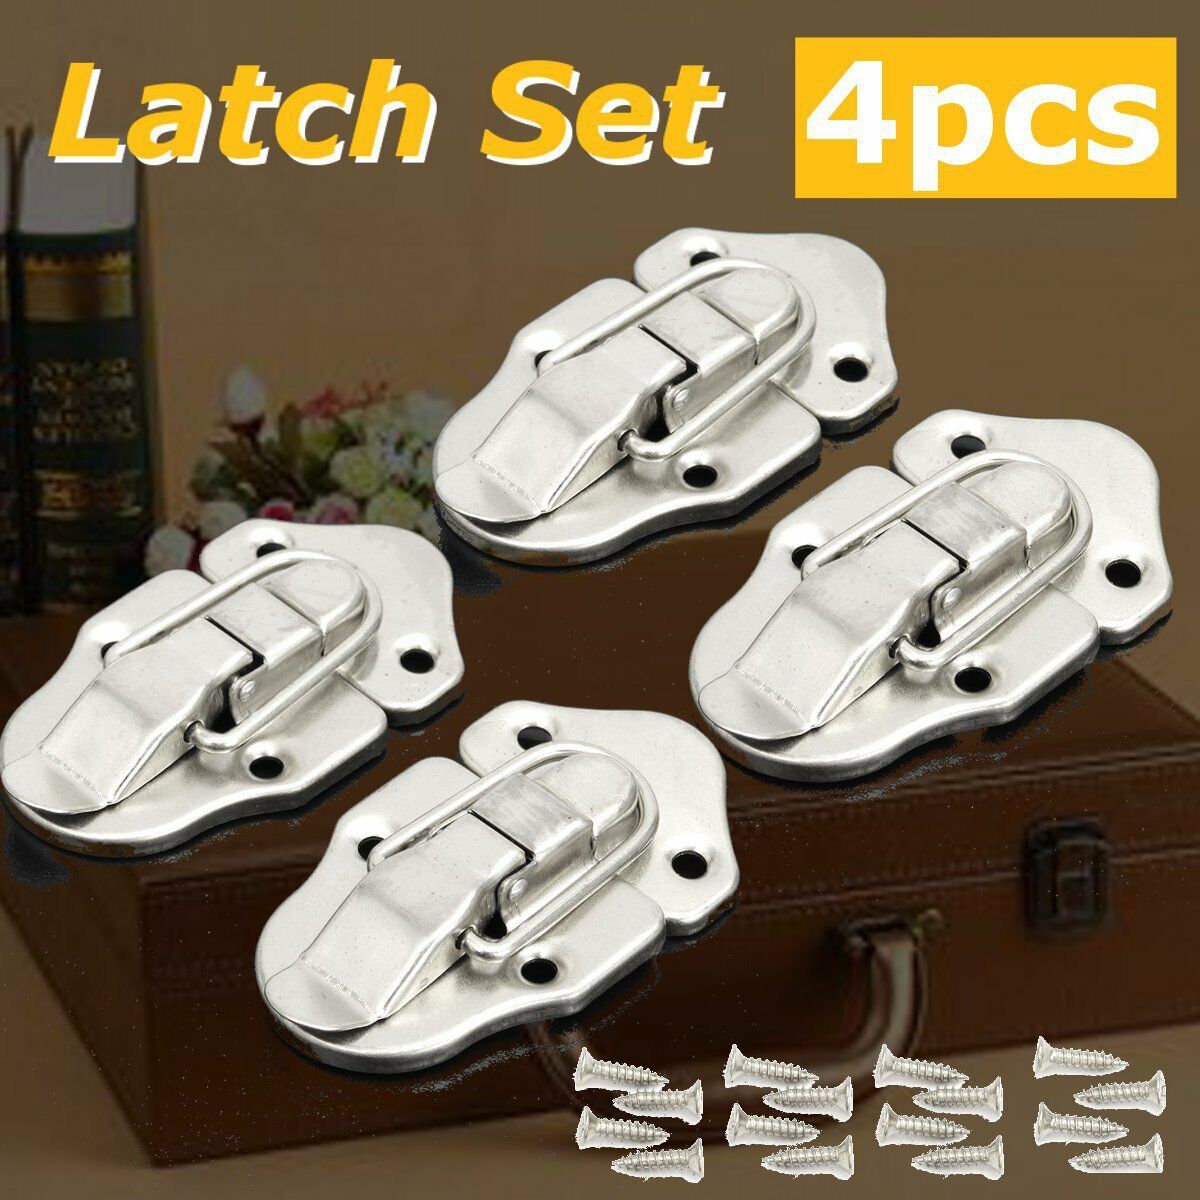 4Pcs Drawbolt Guitar Instrument Luggage Musical Case Stainless Steel Latch